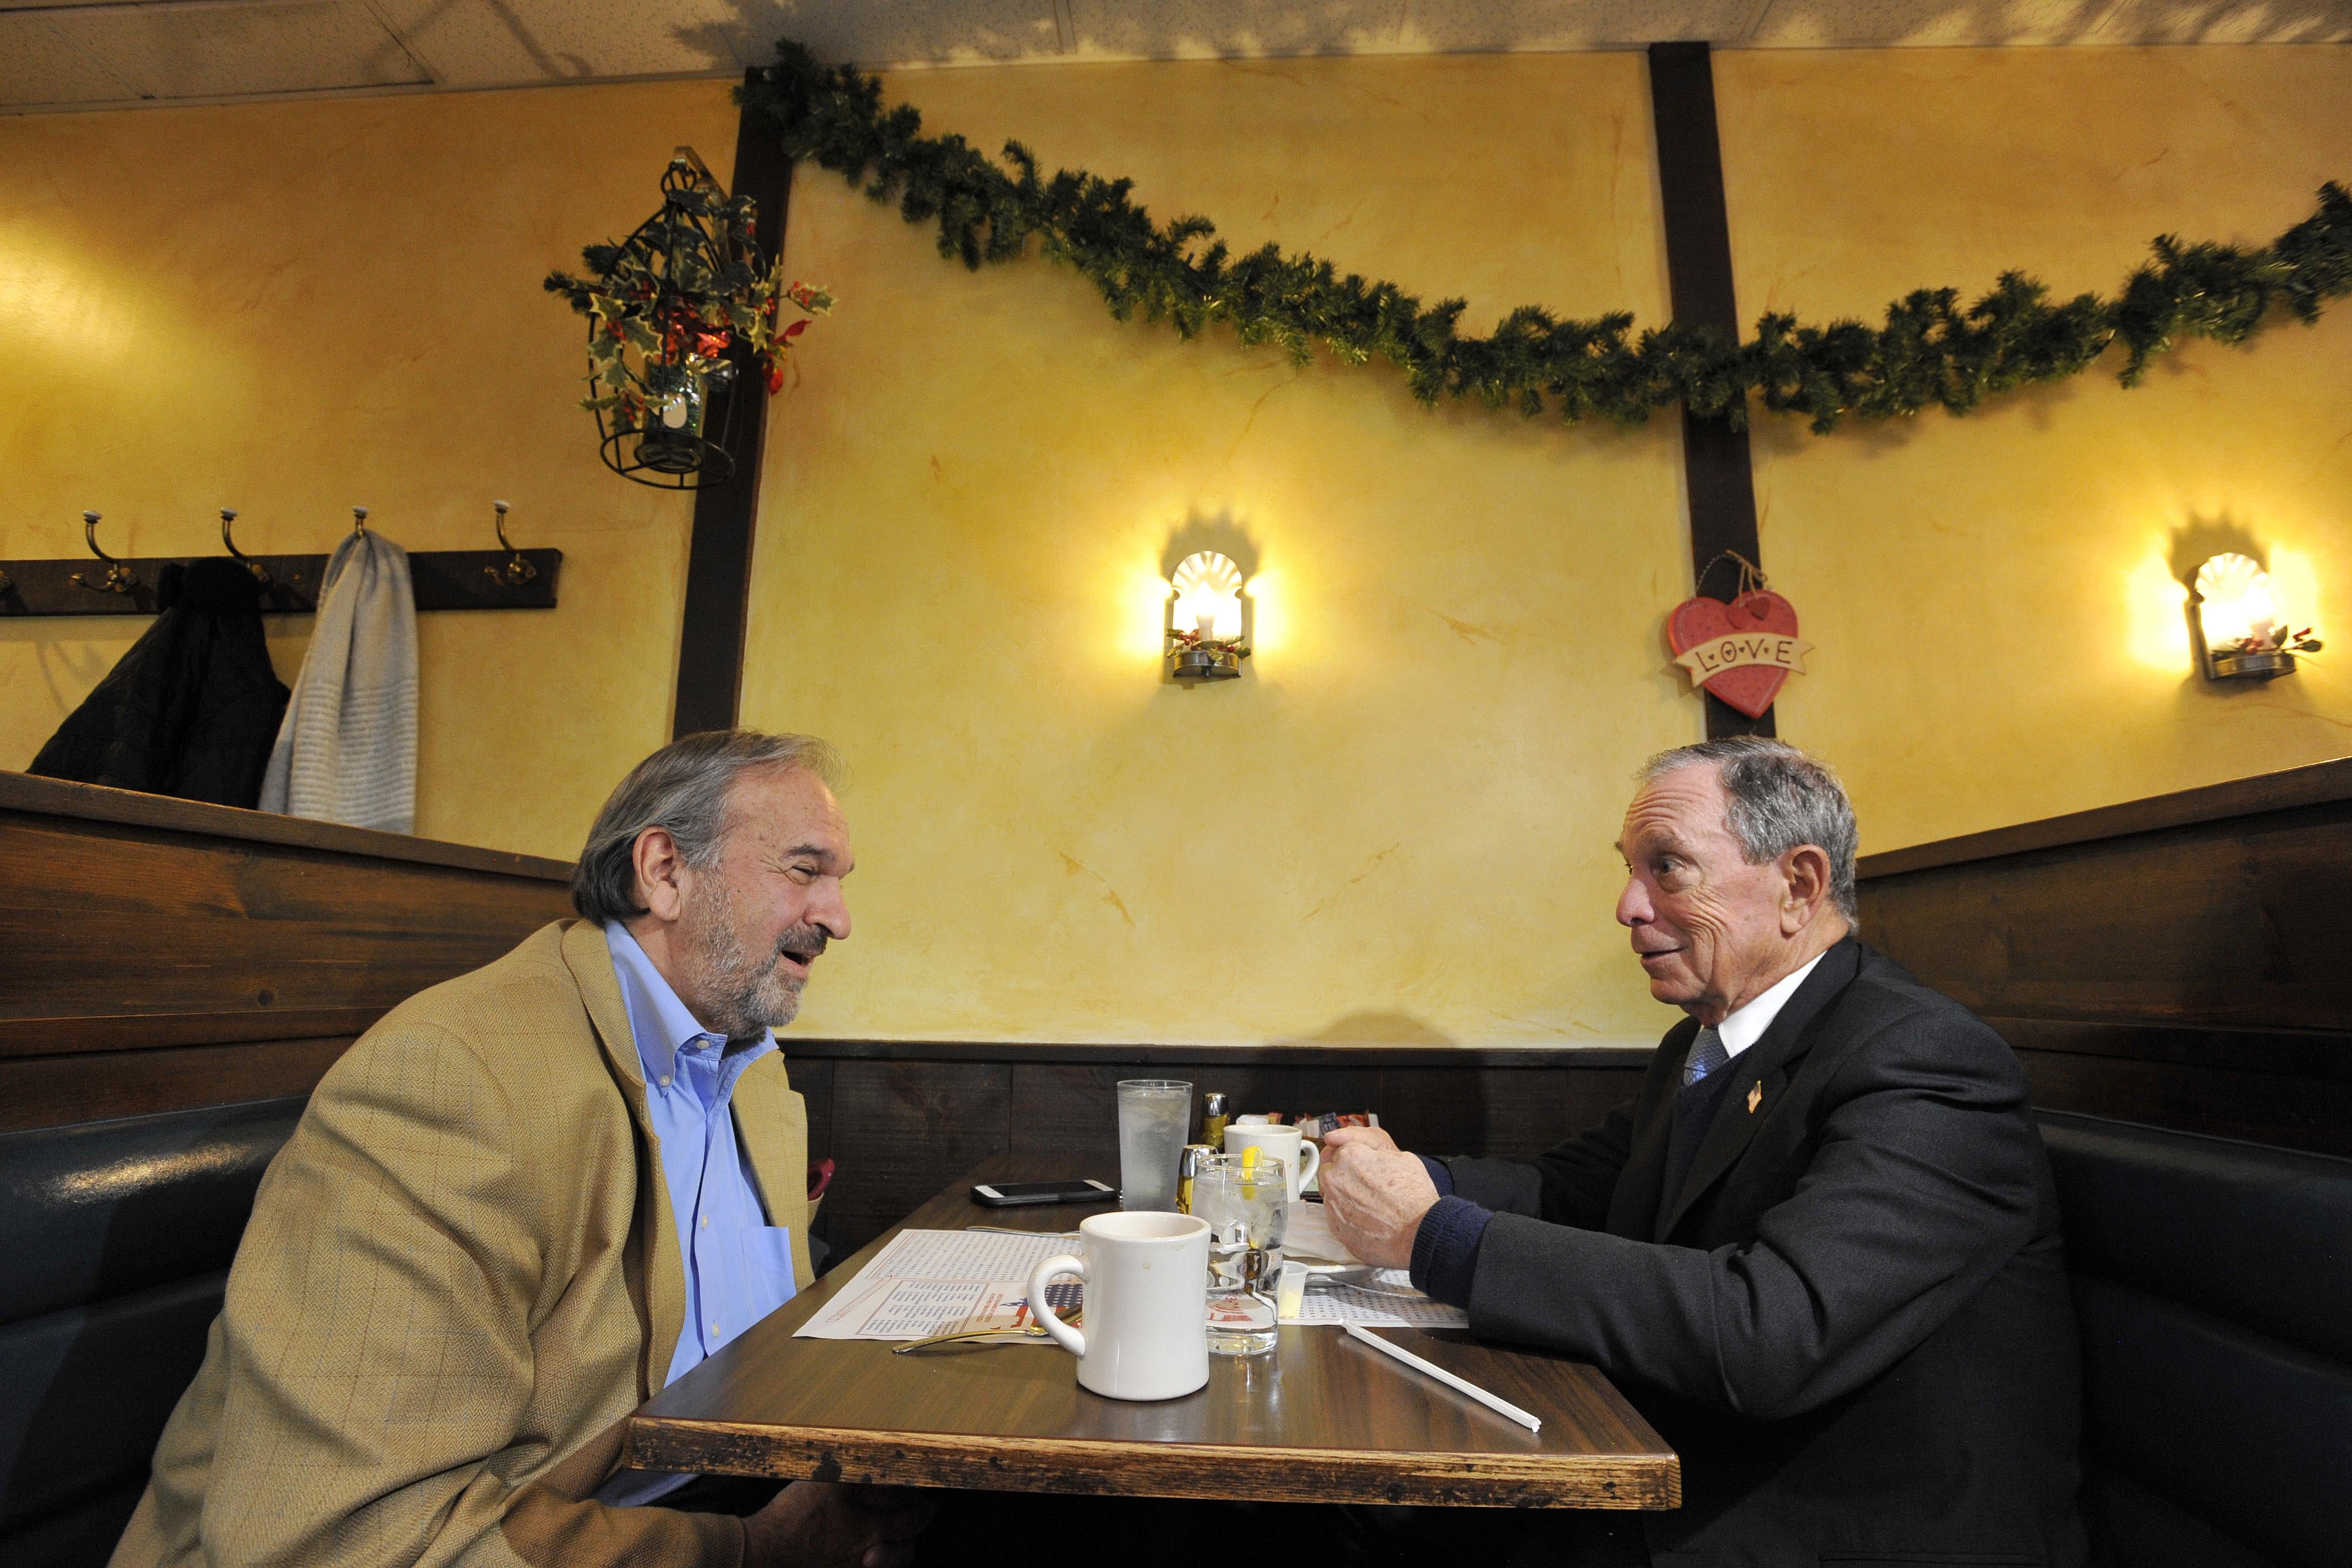 Bloomberg talking to Billy Shaheen over coffee in a diner booth.